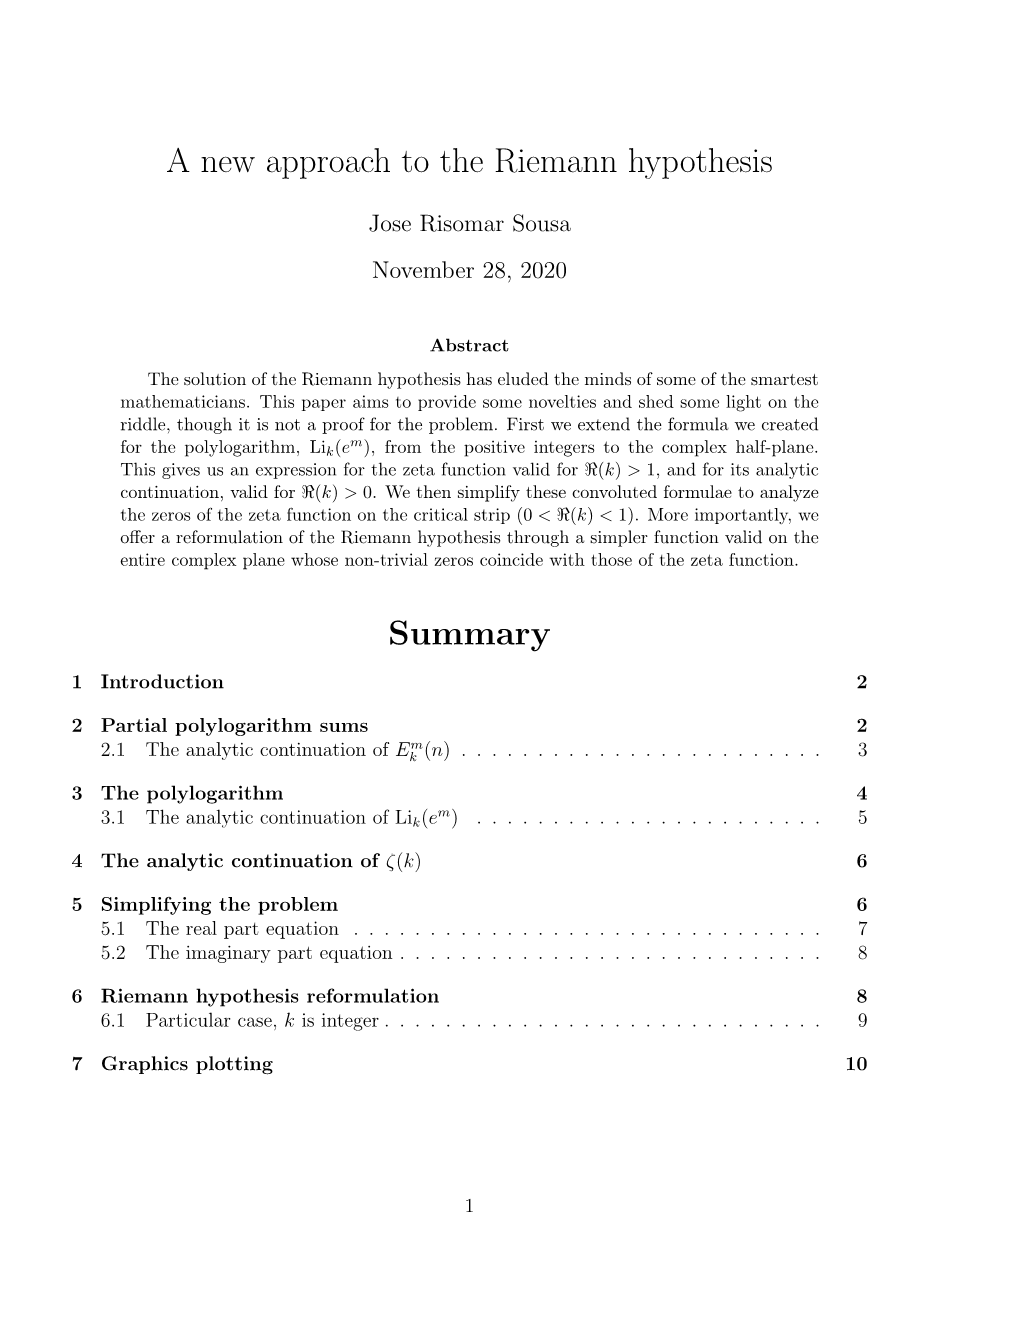 A New Approach to the Riemann Hypothesis Summary